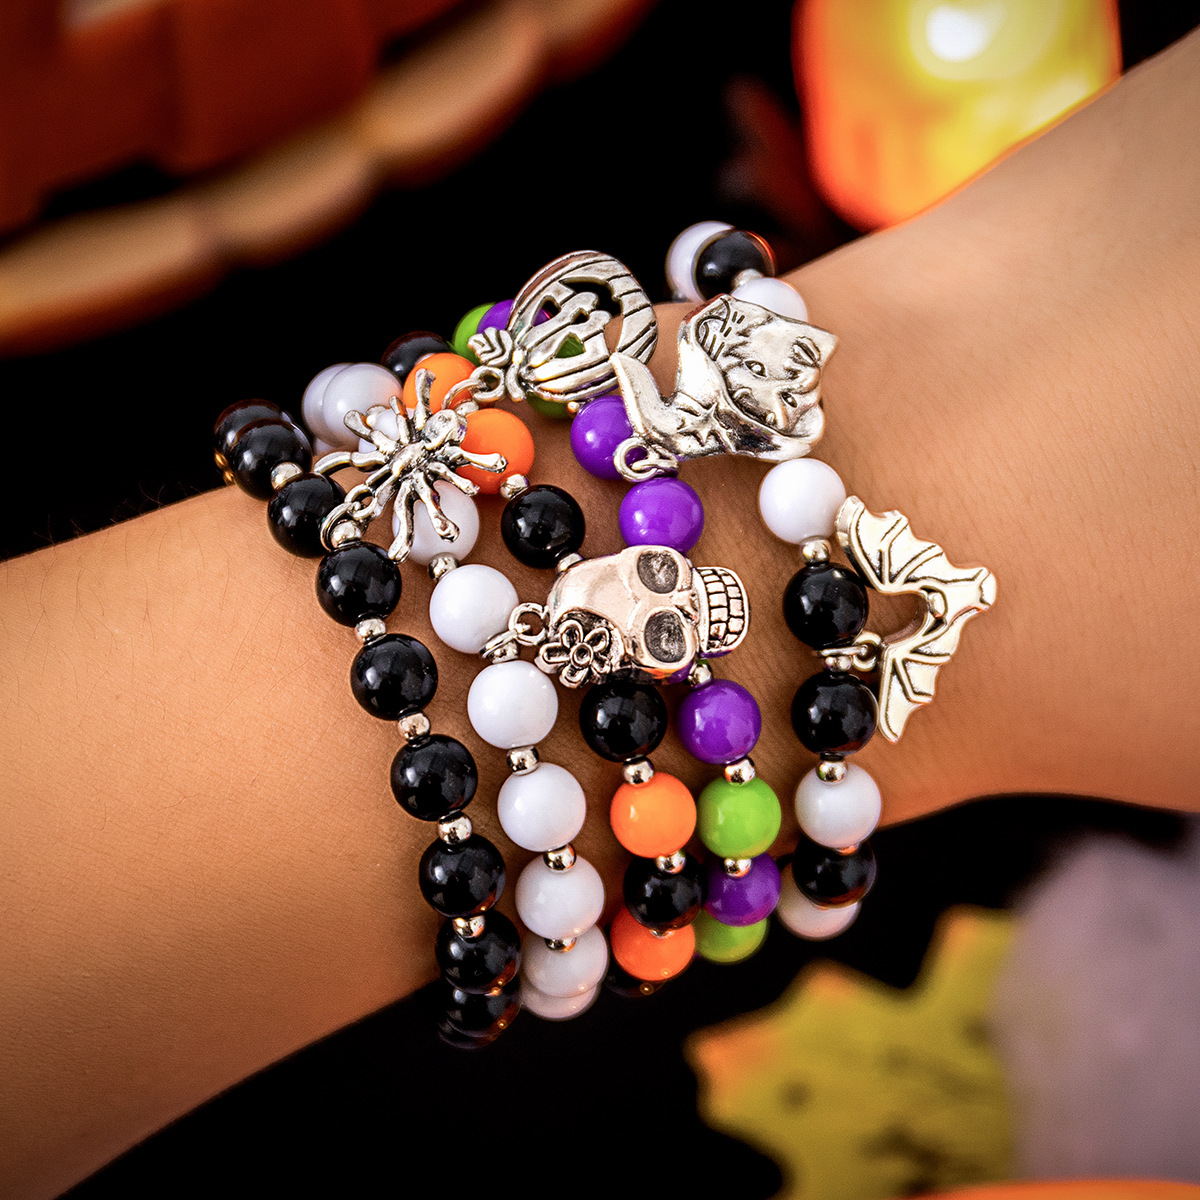 Enchanting Skull Pumpkin Bracelet Set with Witch Spider Beads – Halloween-inspired Jewelry